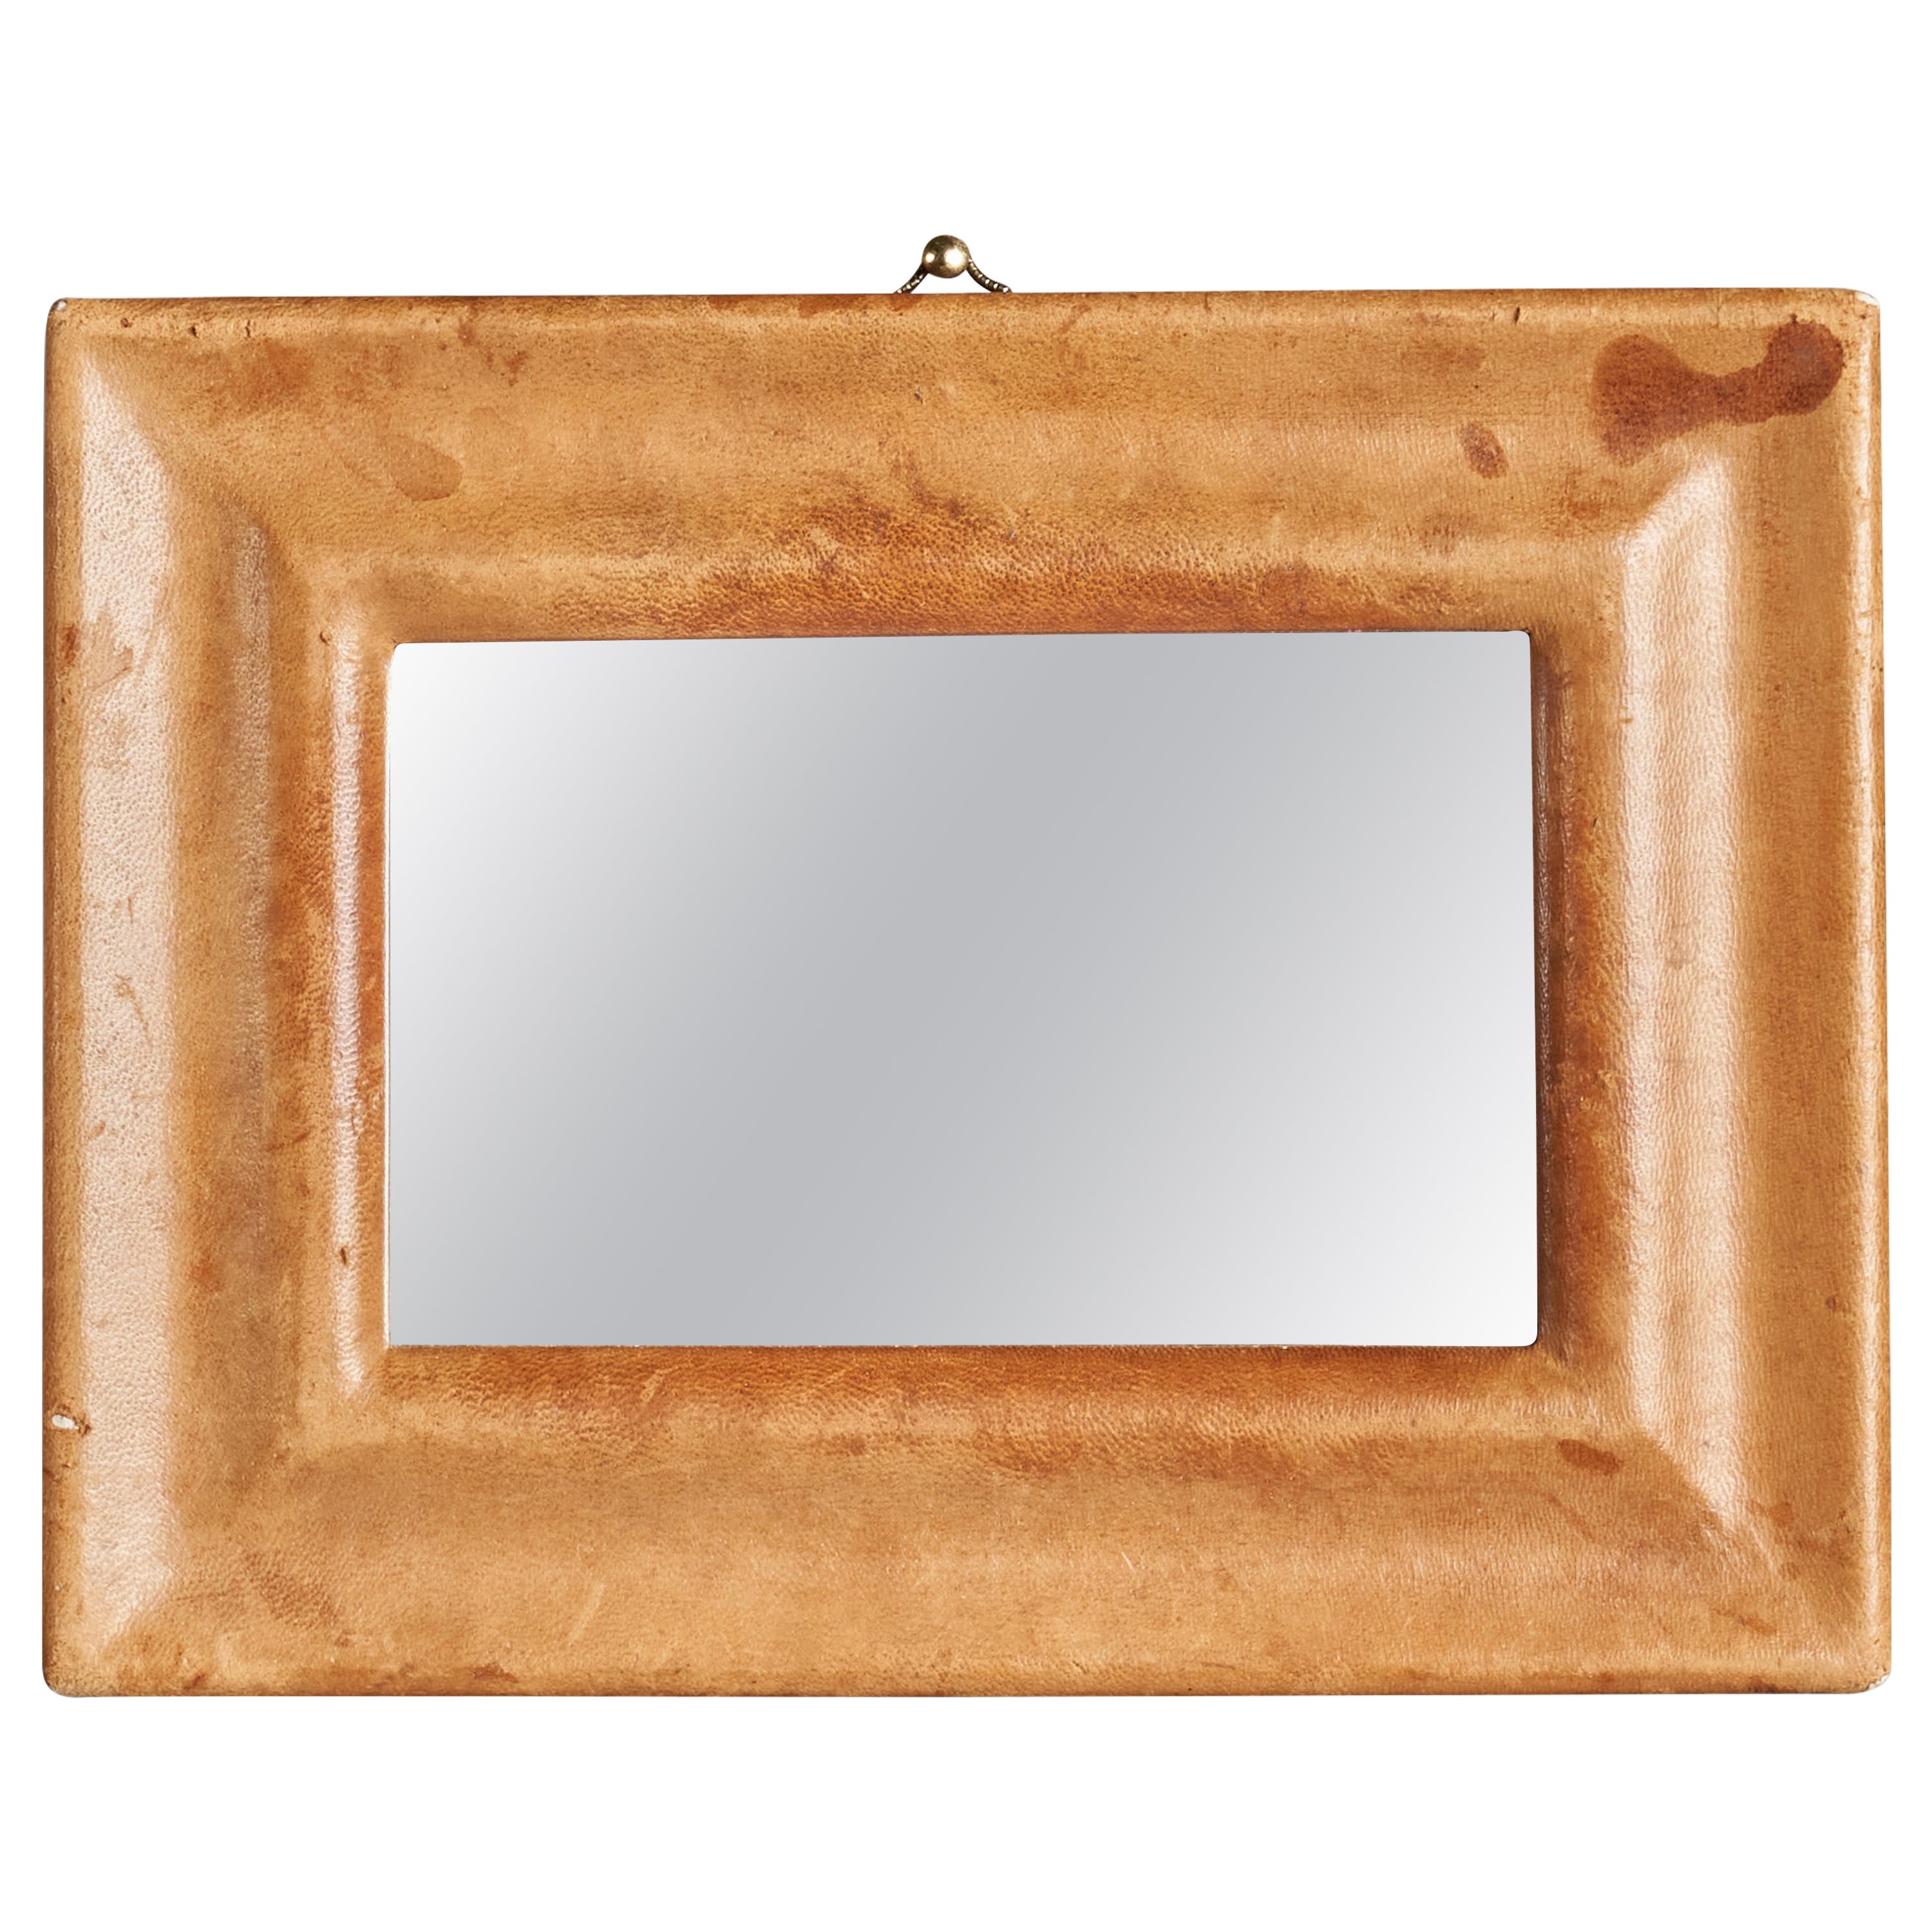 Italian Designer, Wall Mirror, Leather, Italy, 1940s For Sale